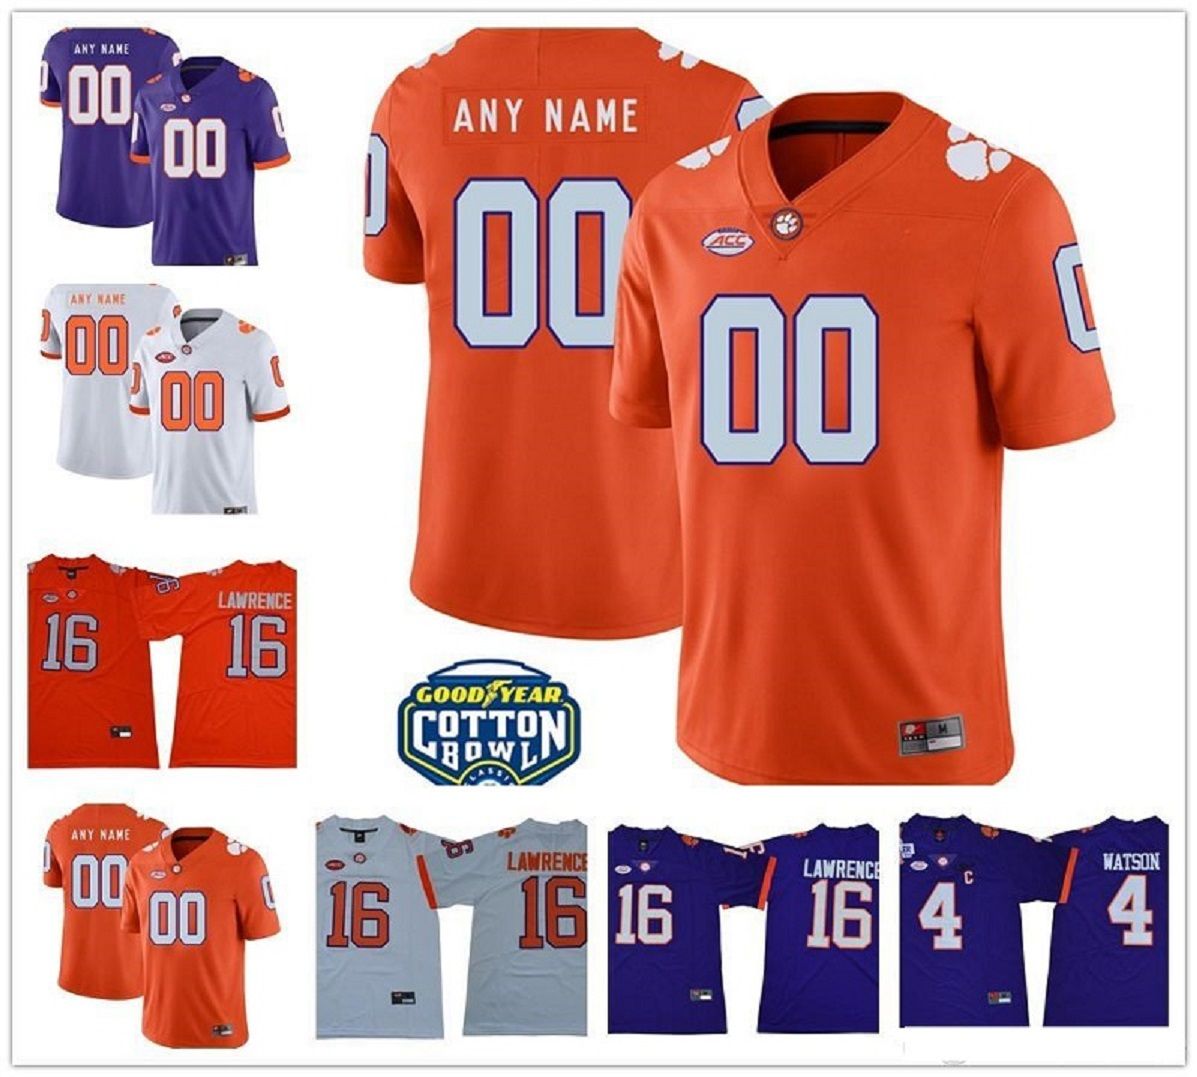 clemson jersey personalized